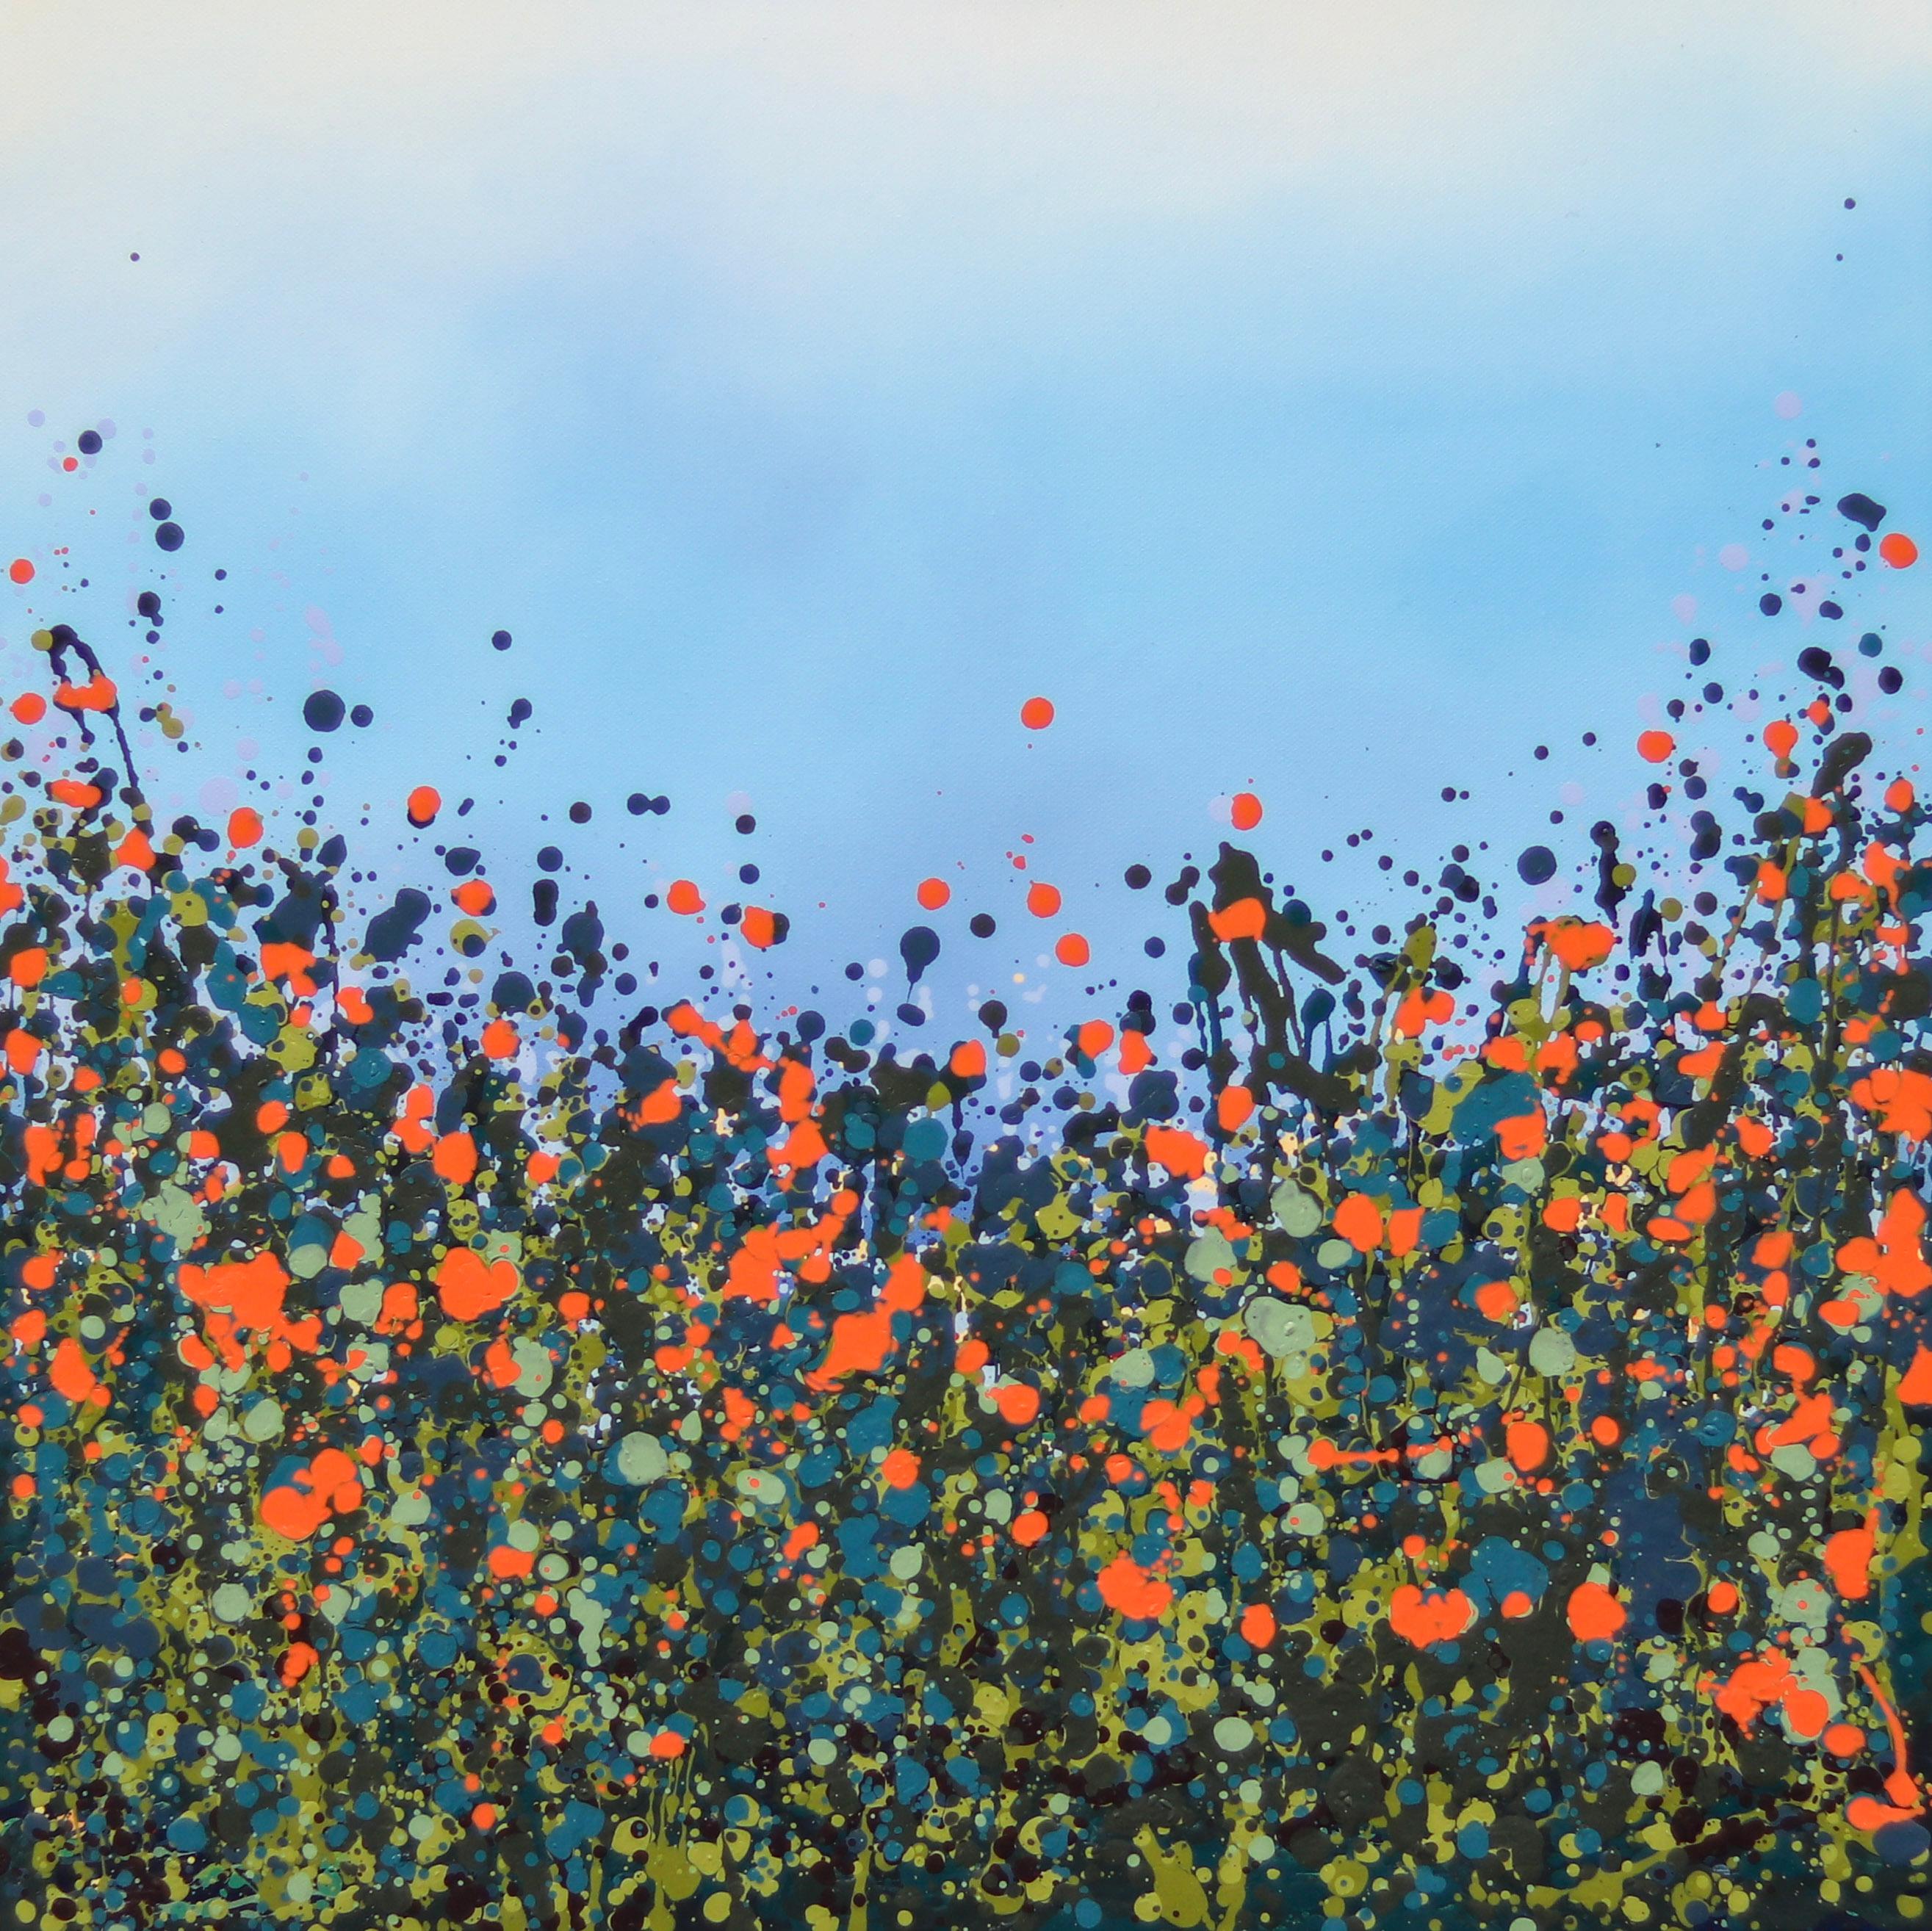 Orange Poppies
Original Abstract Painting
Oil Paint on Canvas
 Image Size: 61 cm x 61 cm x 2.5 cm
Framed Size : 71 cm x 71 cm x 2.5 cm

Orange Poppies is an original painting by Sophie Berger.
Sophie often sketches on the north moors and in Skaigh